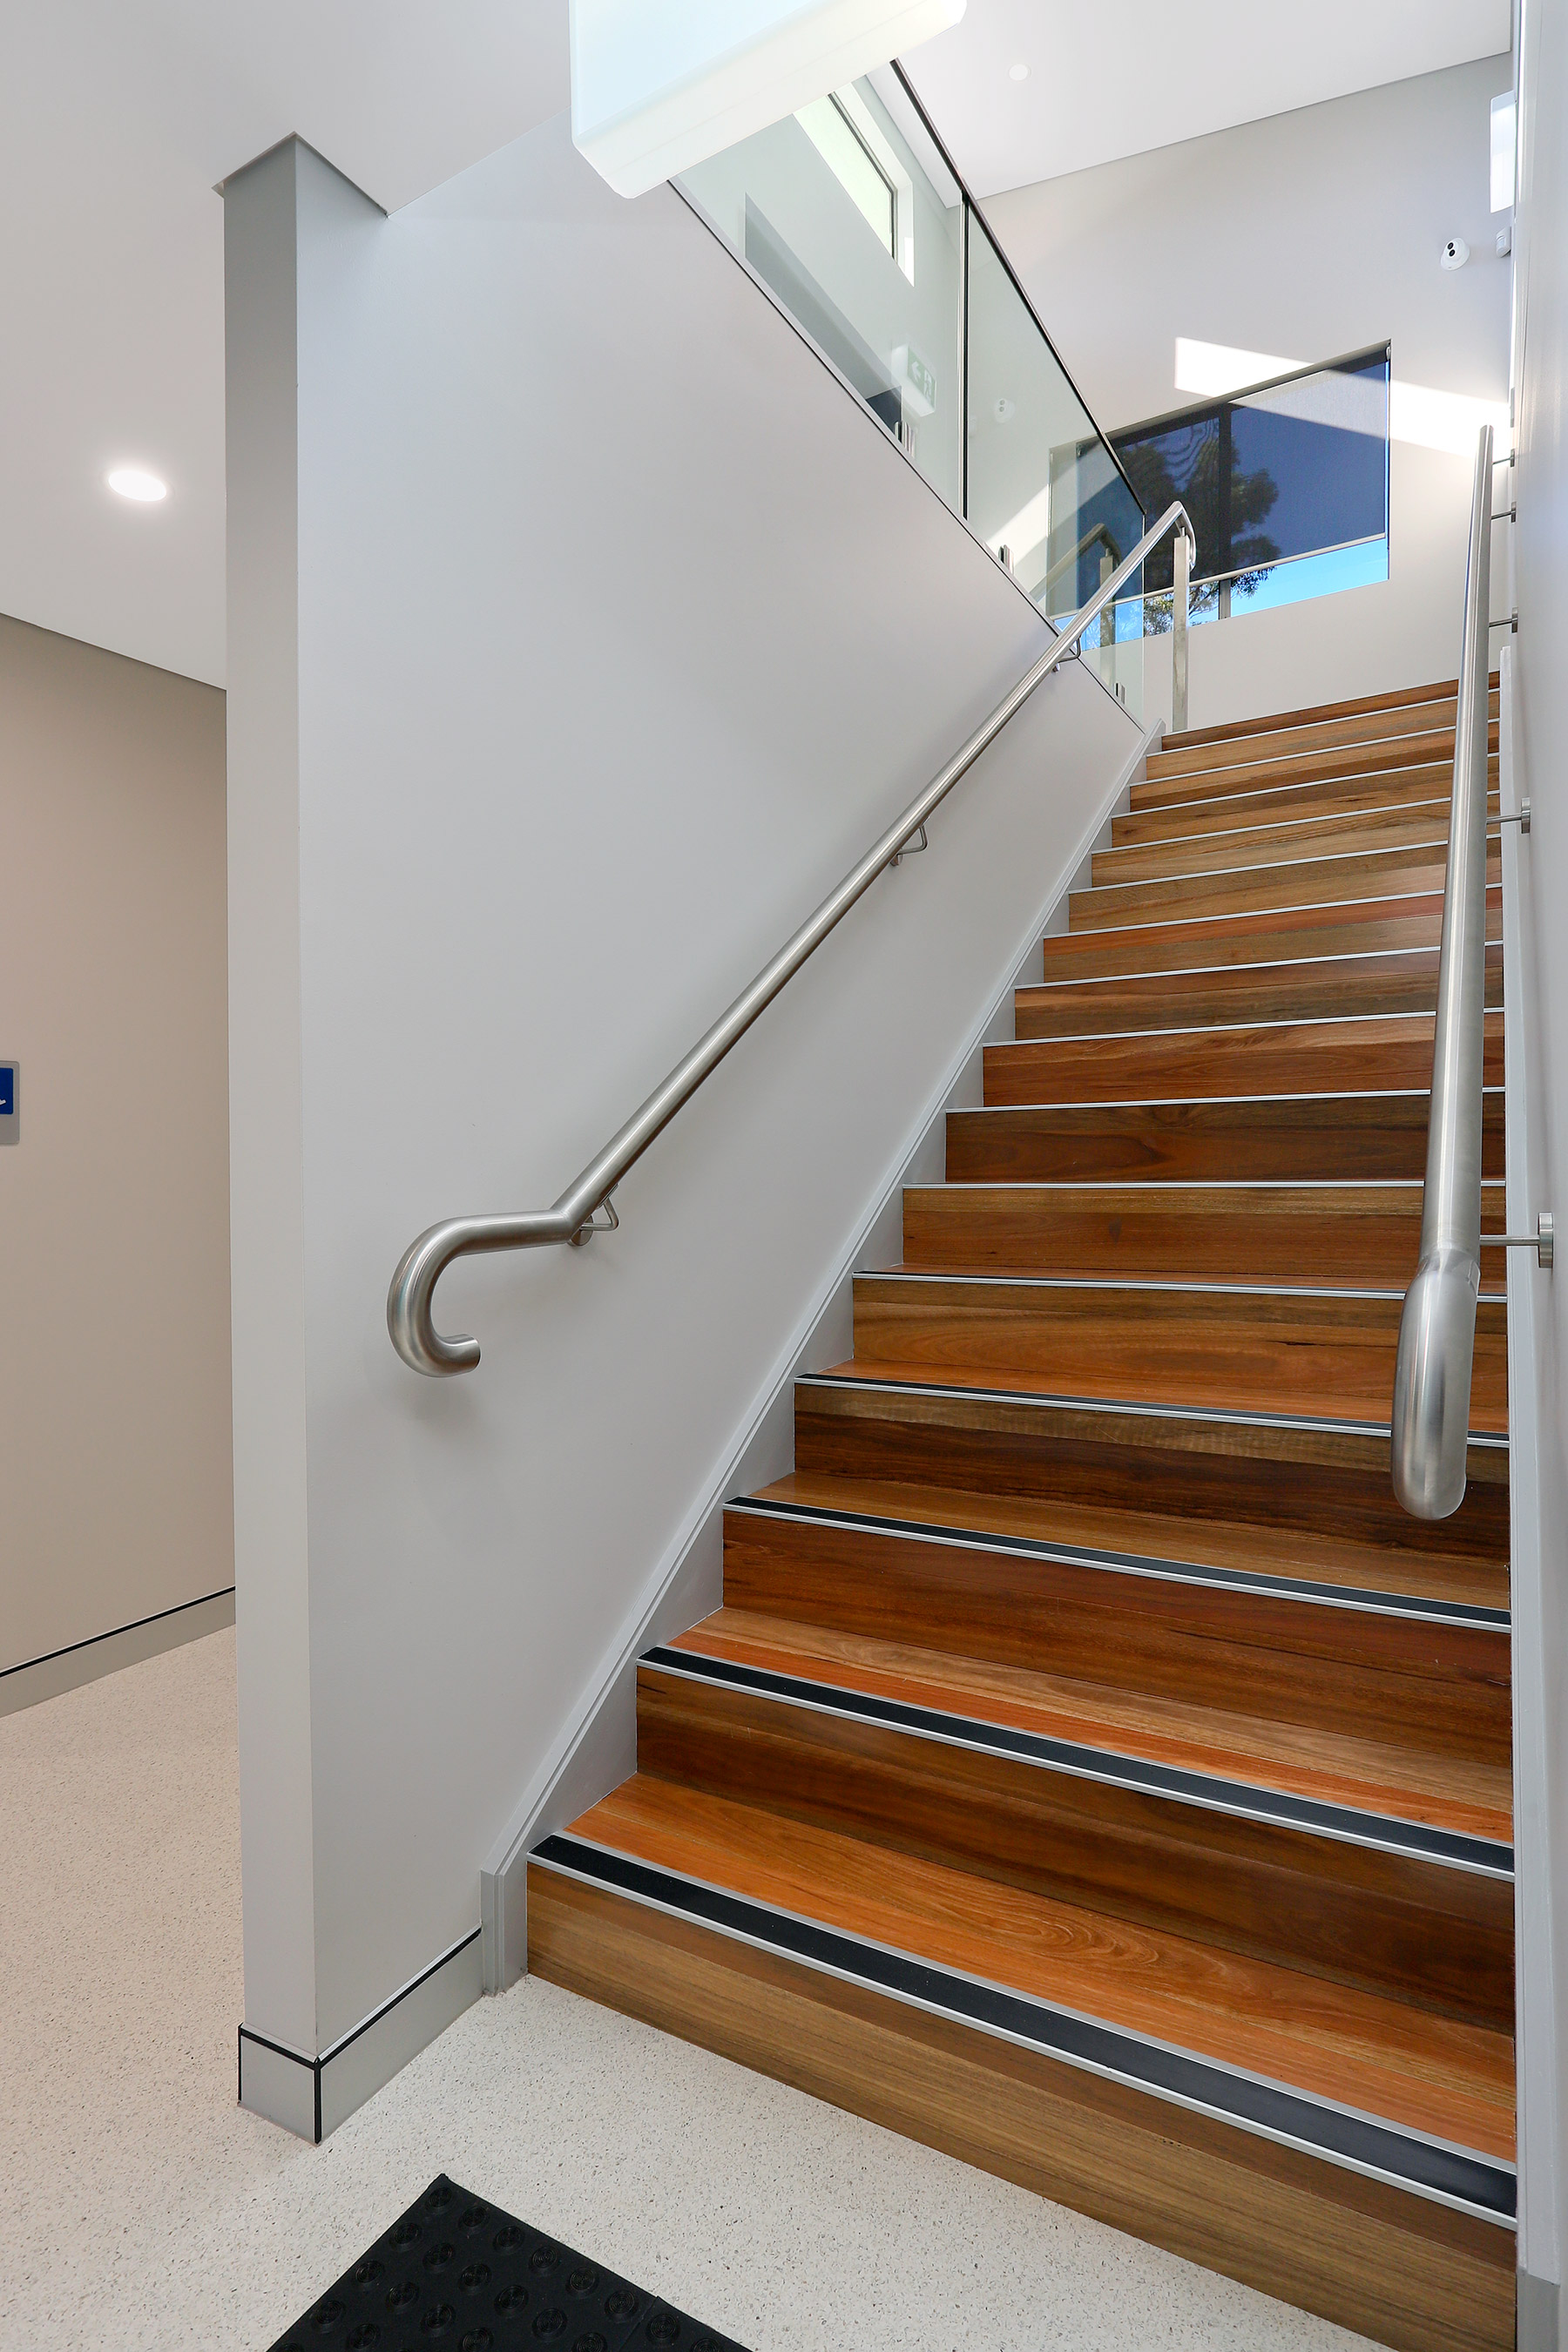 JG Dental staircase with handrails